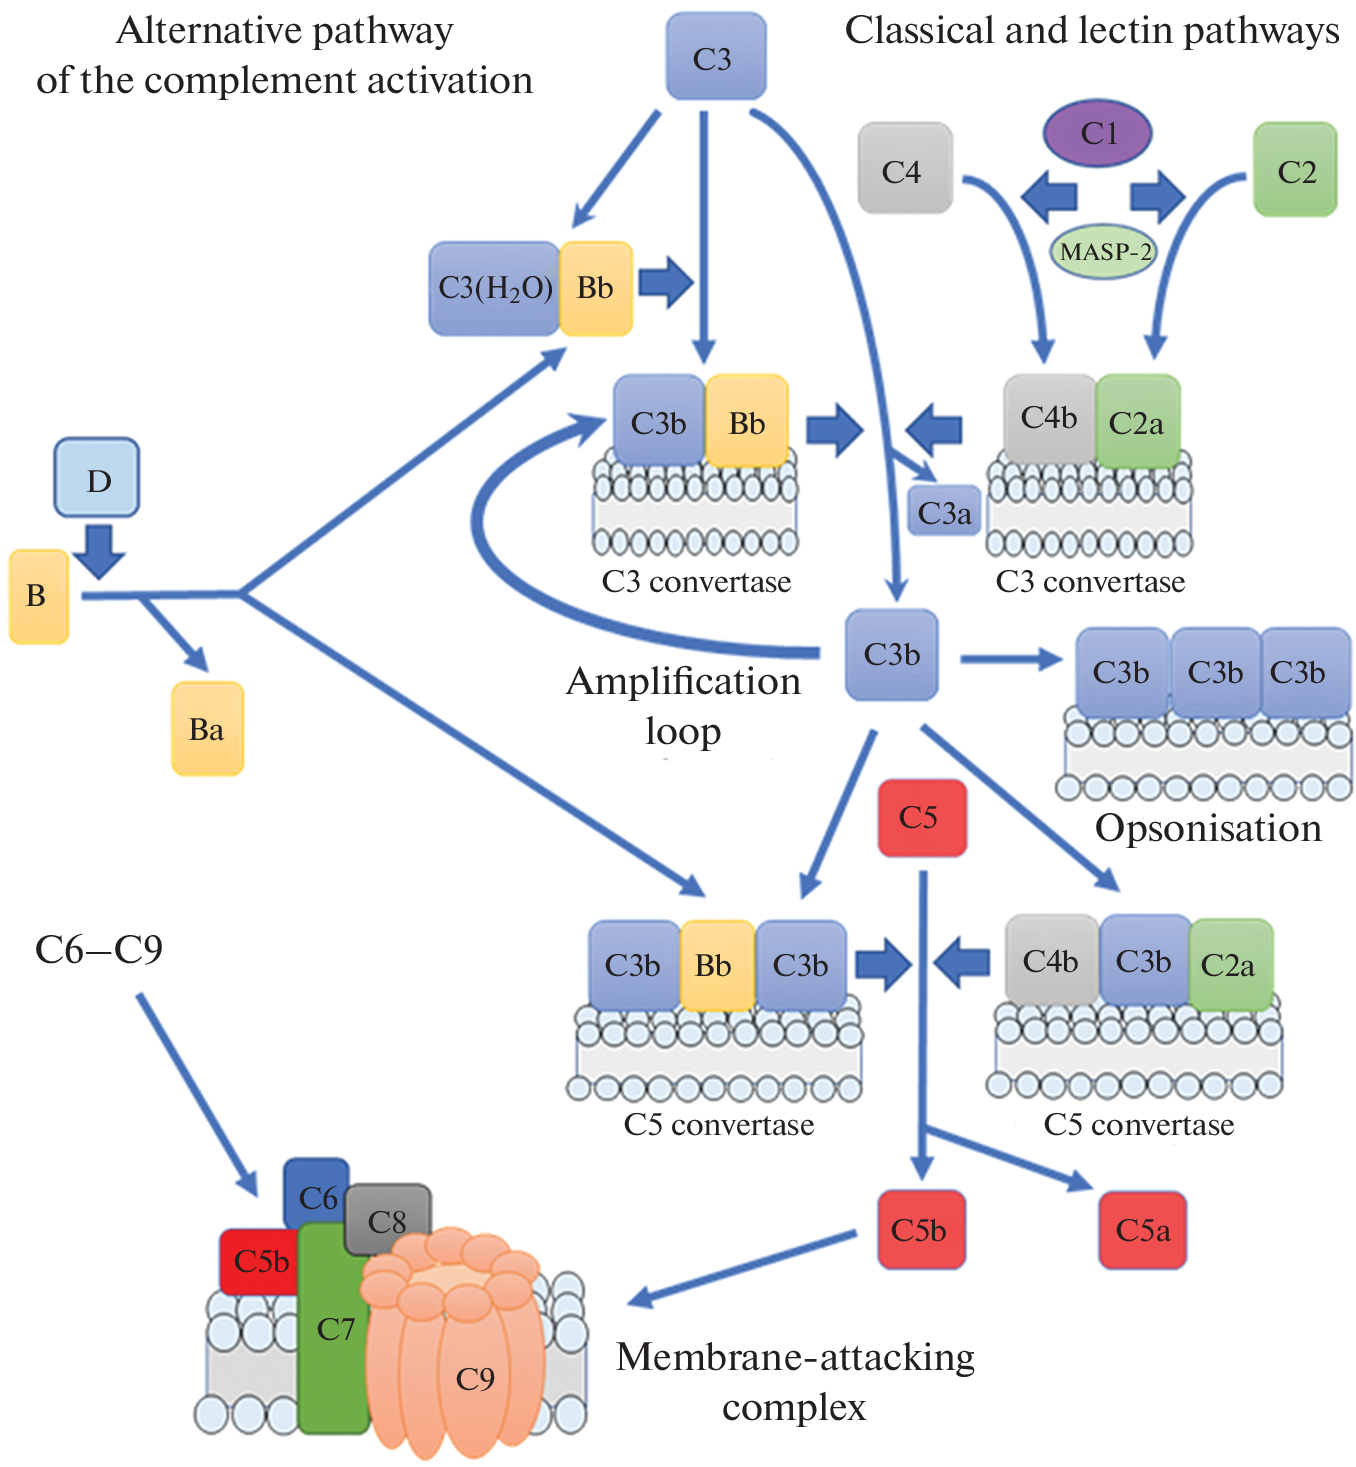 Activation of Complement Factor C3/C3b Deposition on the of Endothelial Cell Surface by Histamine As one of the Causes of Endothelium Damage in COVID-19